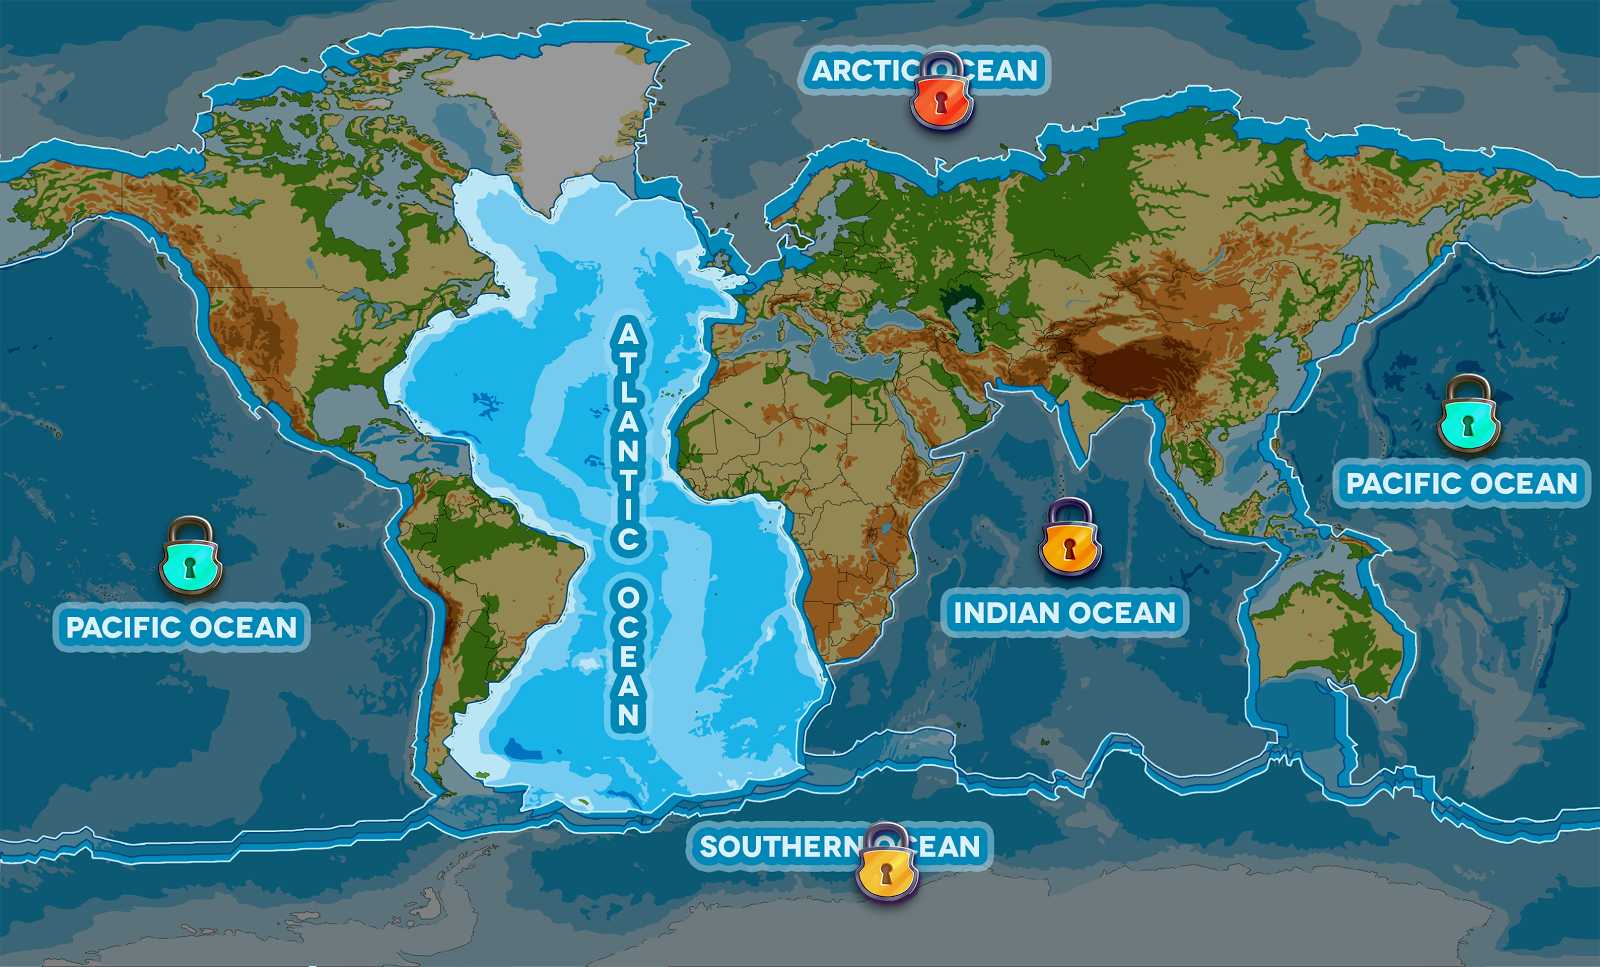 Copyright map of the world game screen SeaVax ocean cleaning game 15 February 2018